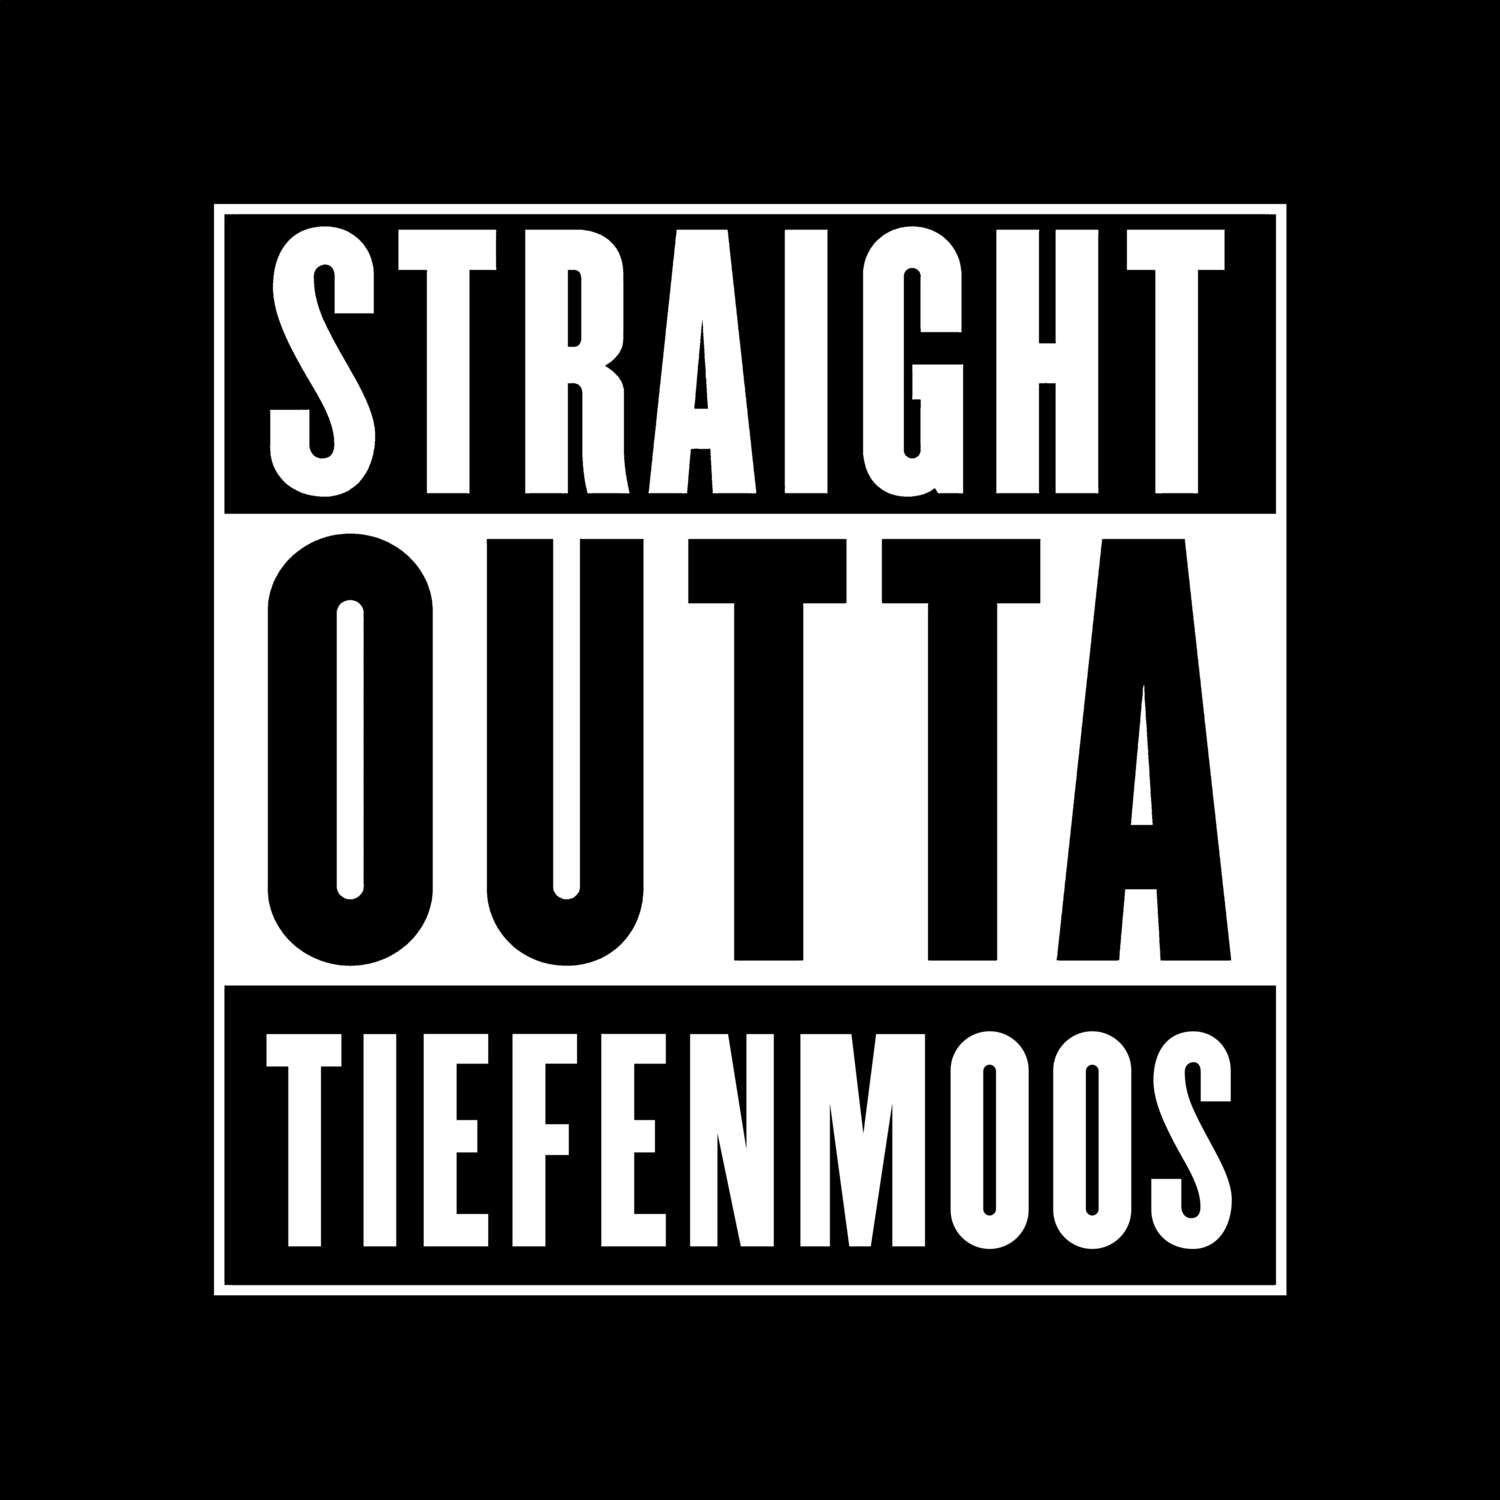 Tiefenmoos T-Shirt »Straight Outta«